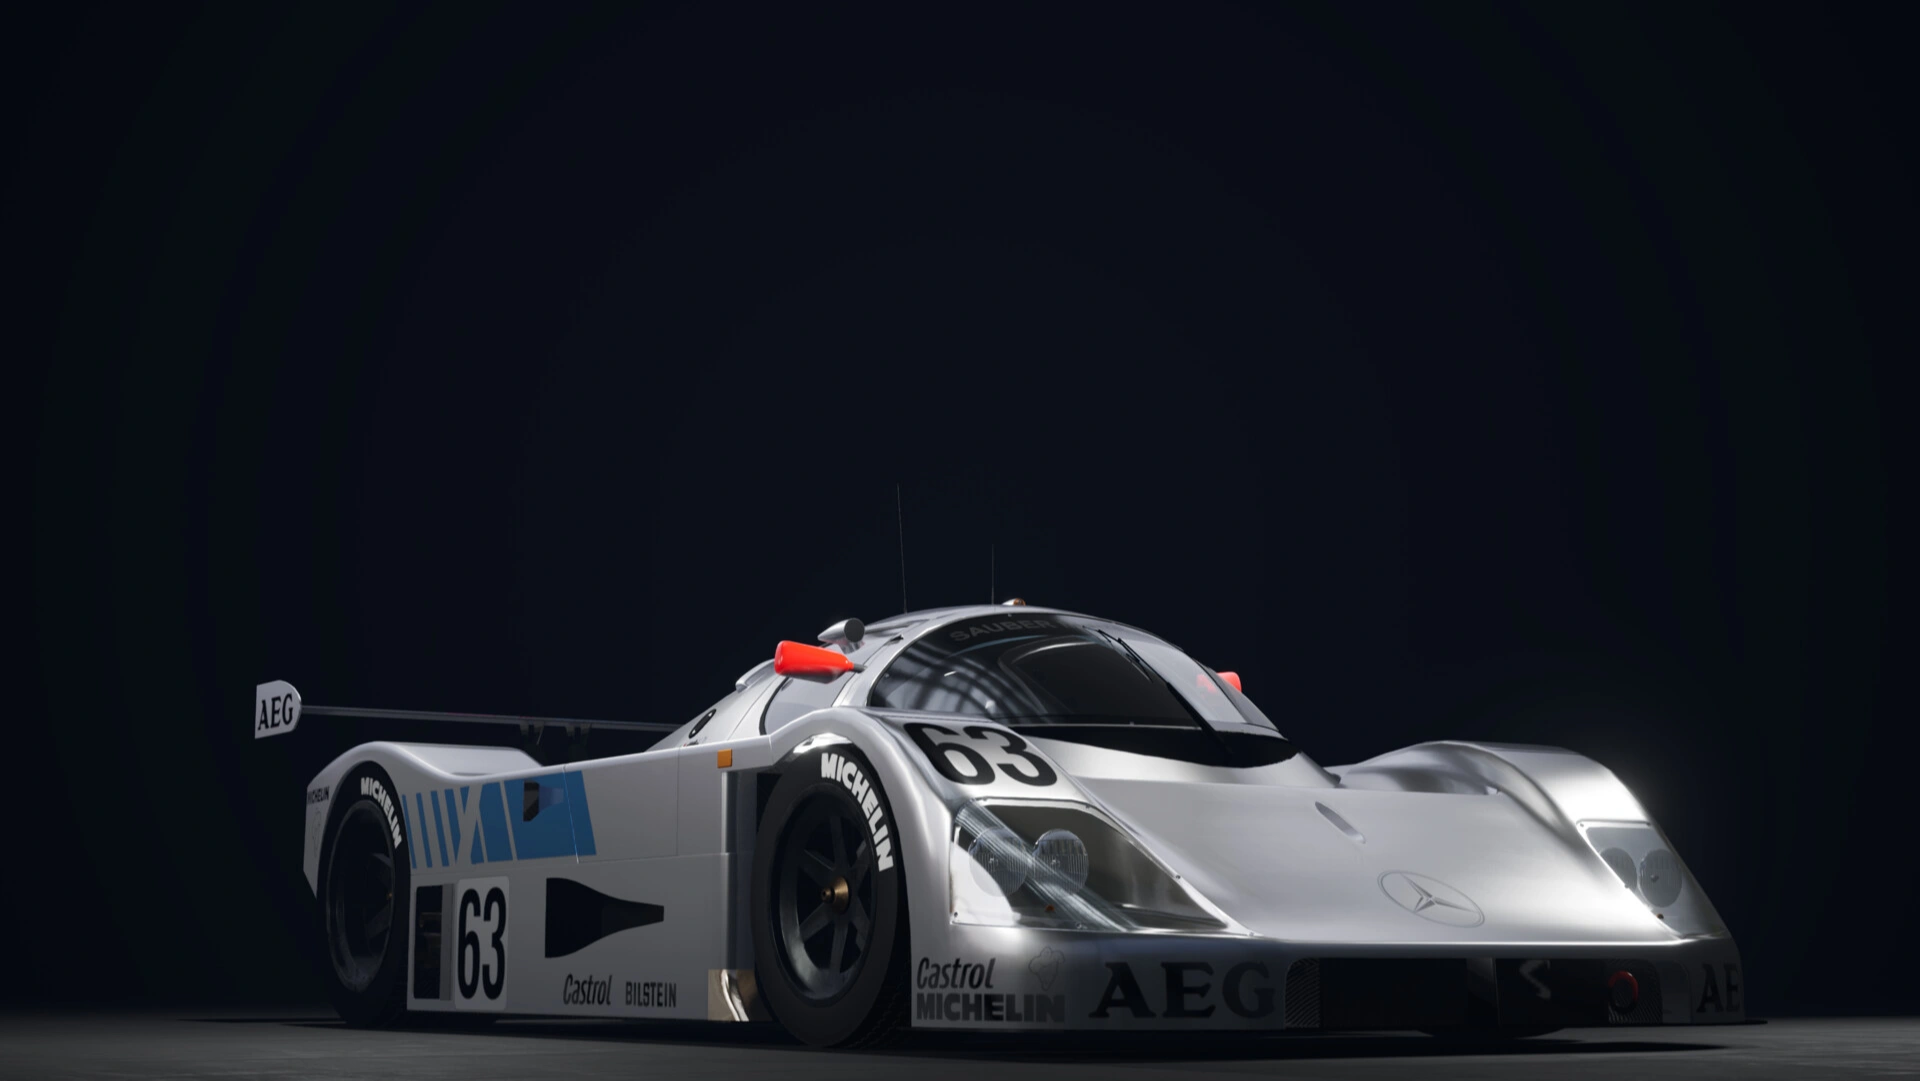 Mercedes Sauber C9 Personal work - Real time project in Unreal Engine 4. It is a reproduction of the Mercedes Sauber C9, model from 1989, which notably competed in the 24 Hours of Le Mans. The car was modeled with Maya, textured with Substance Painter and Photoshop, rendered with Unreal. Ground texture, come from Quixel. I wanted to thank Romain Maistre-Bazin and Bastien Chagnon for their advice on lighting and rendering.